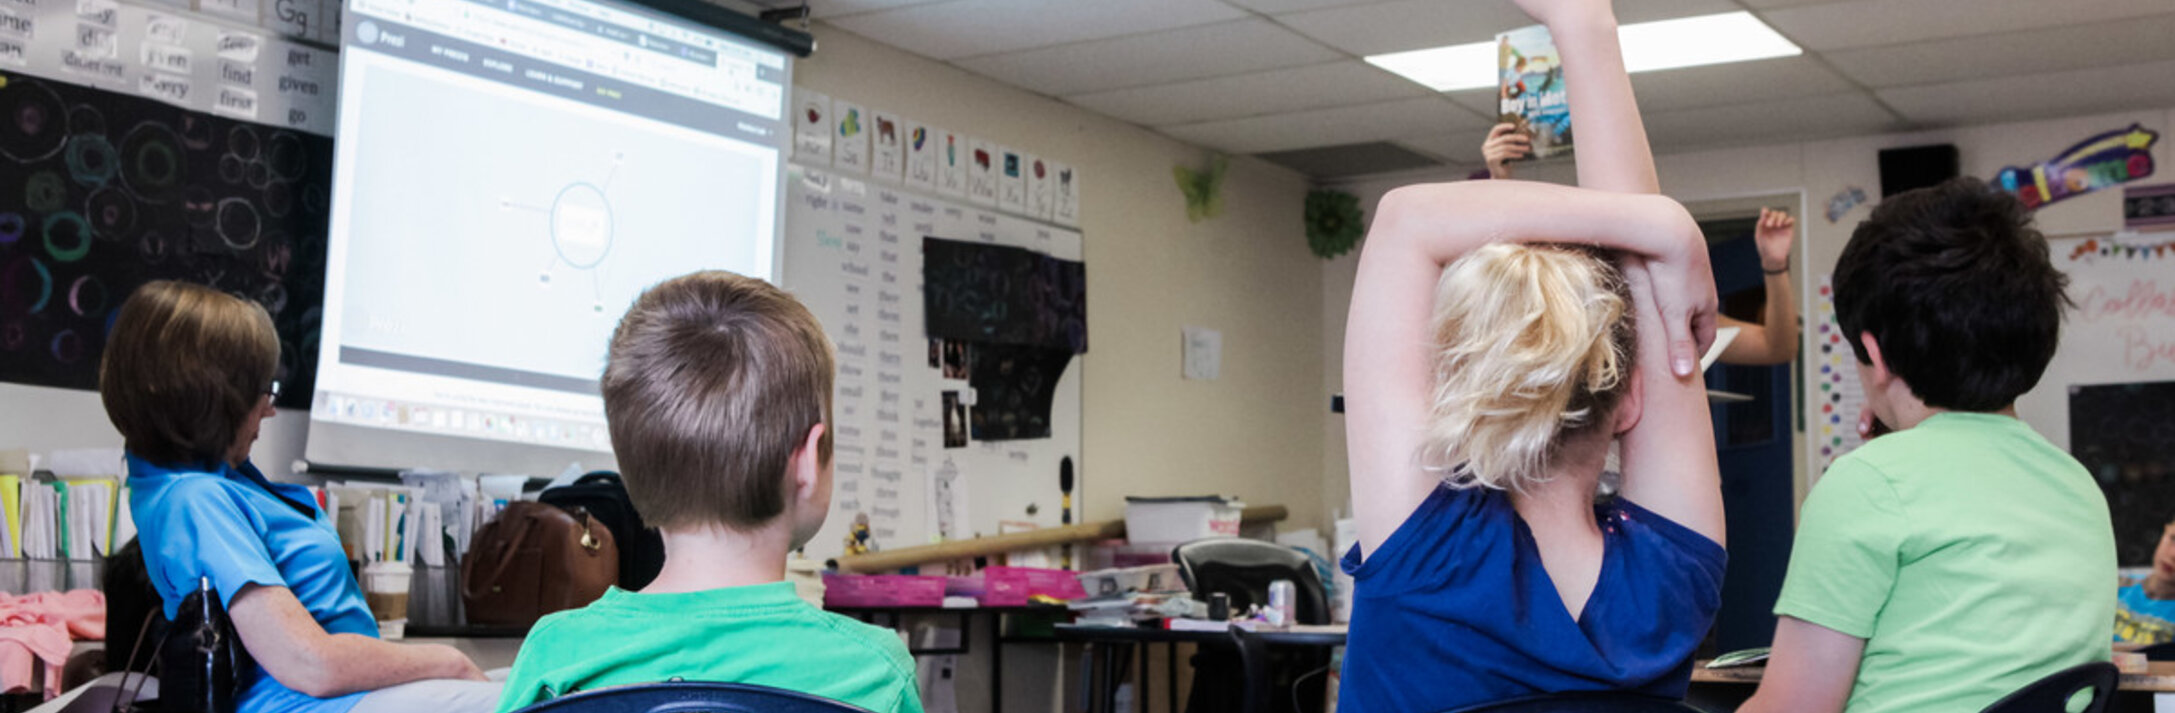 Meet Tyler Bargen, 2019 Educator Difference Maker of the Year
